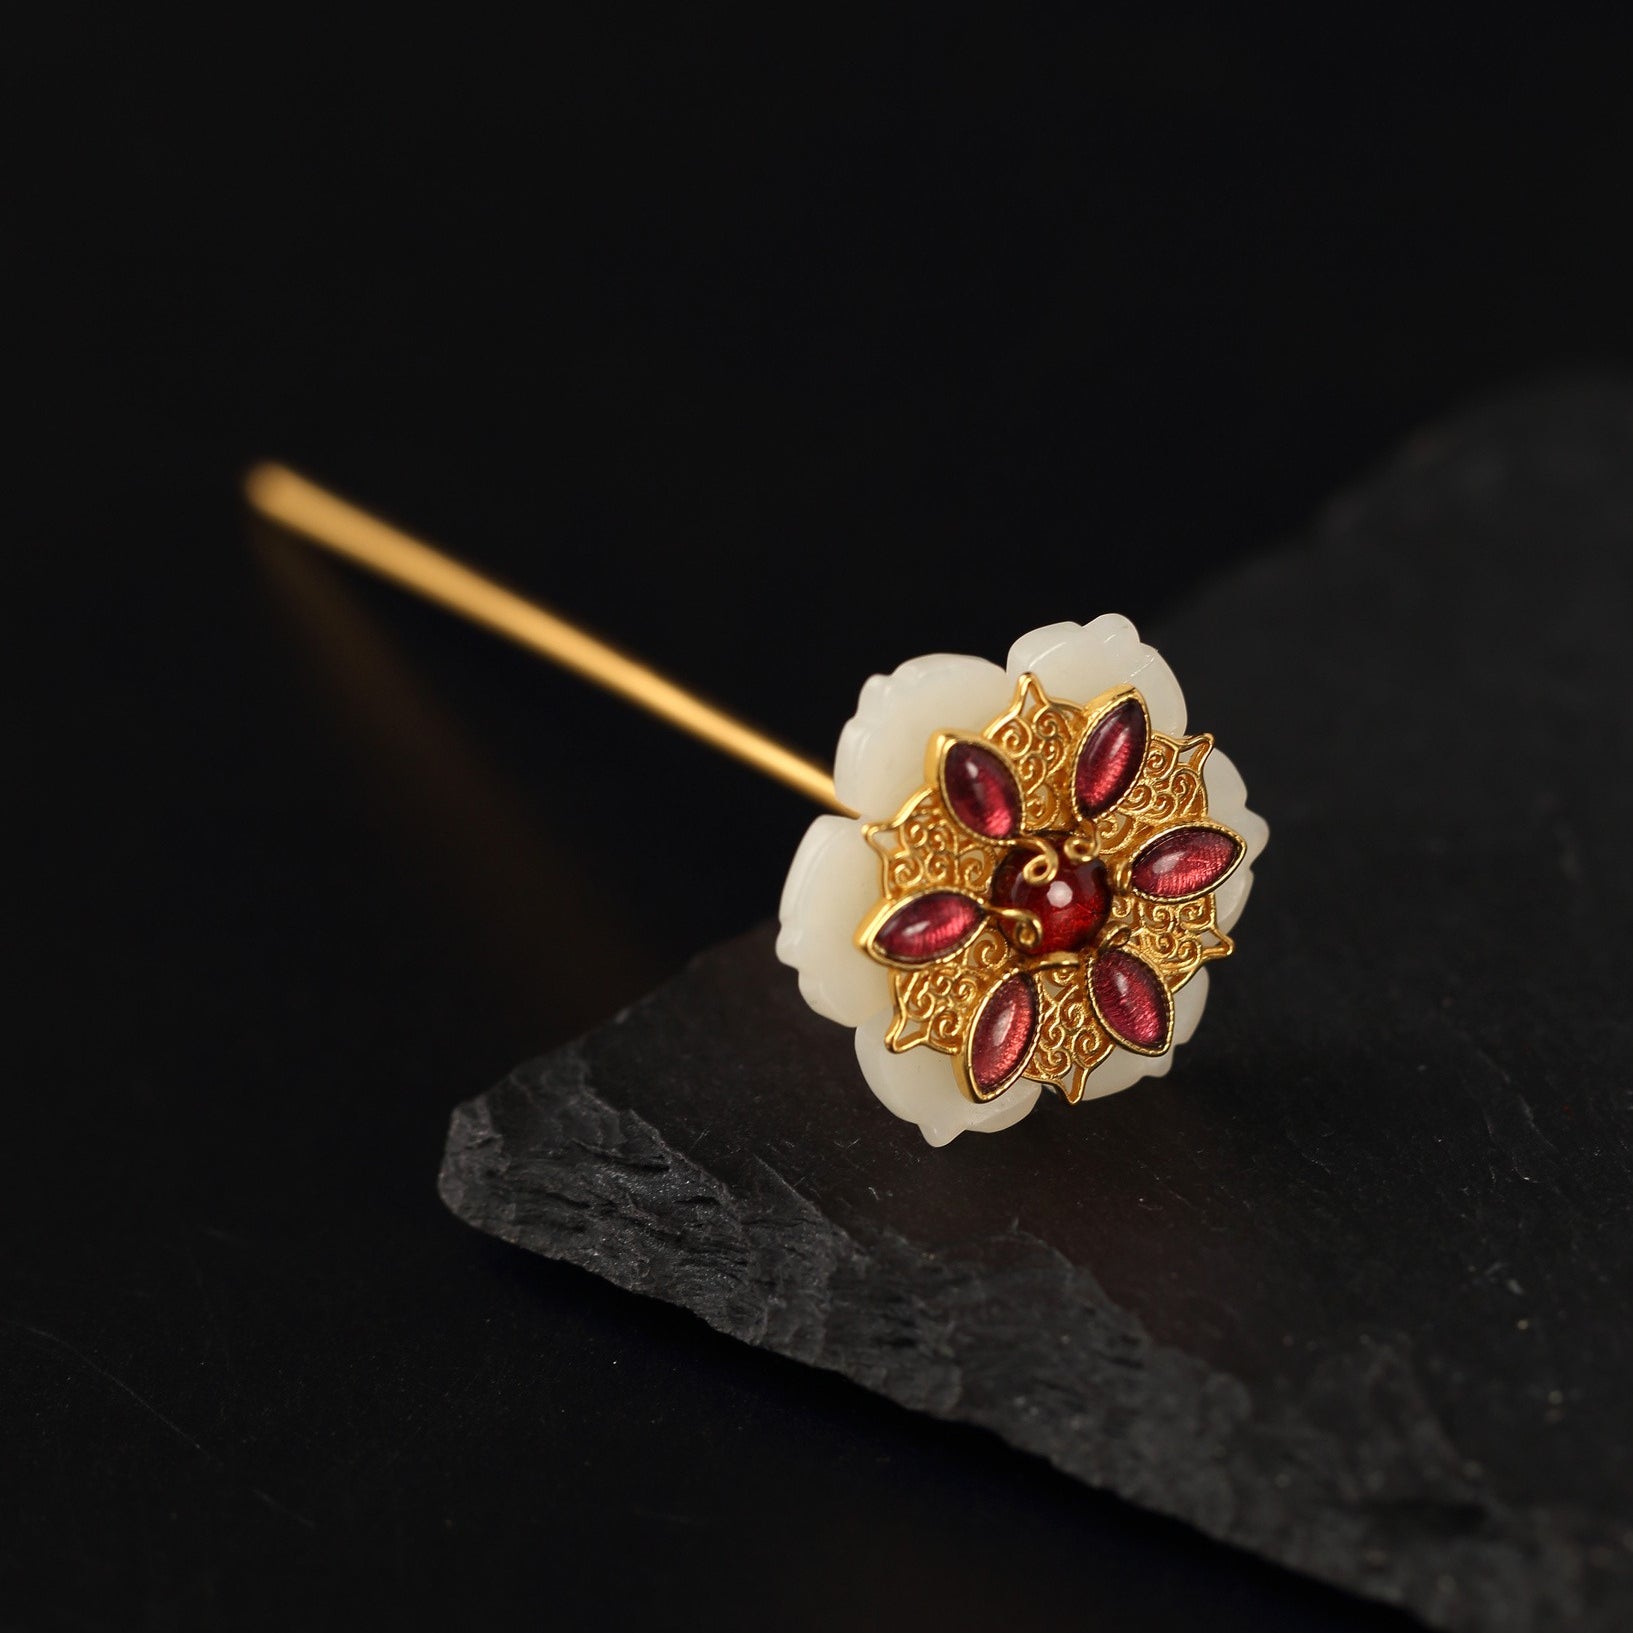 Chinese Traditional Floral Hairpin with Jade & Garnet